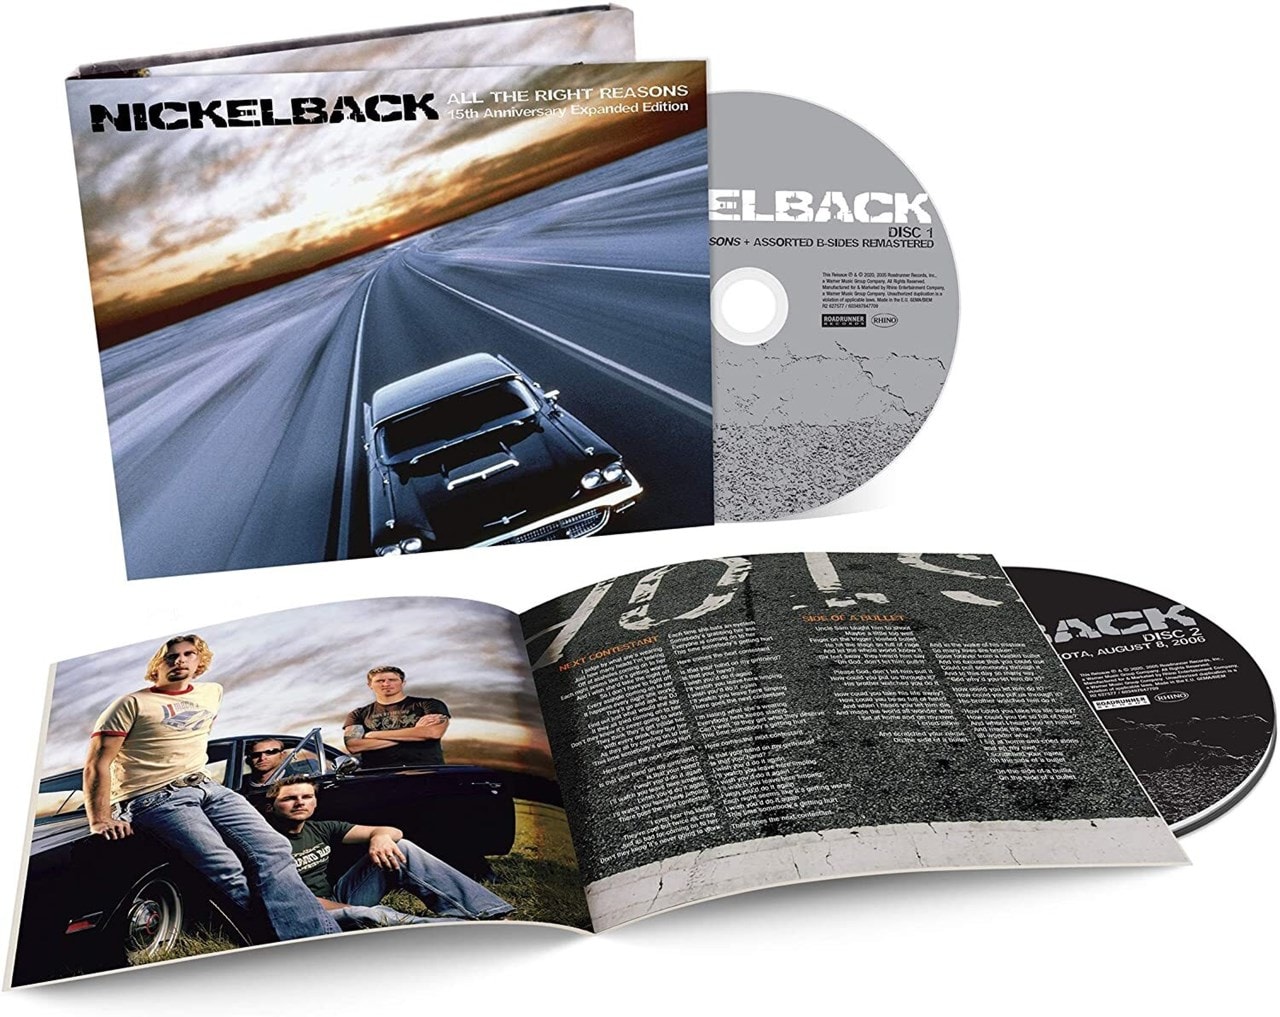 nickelback album all the right reasons free download